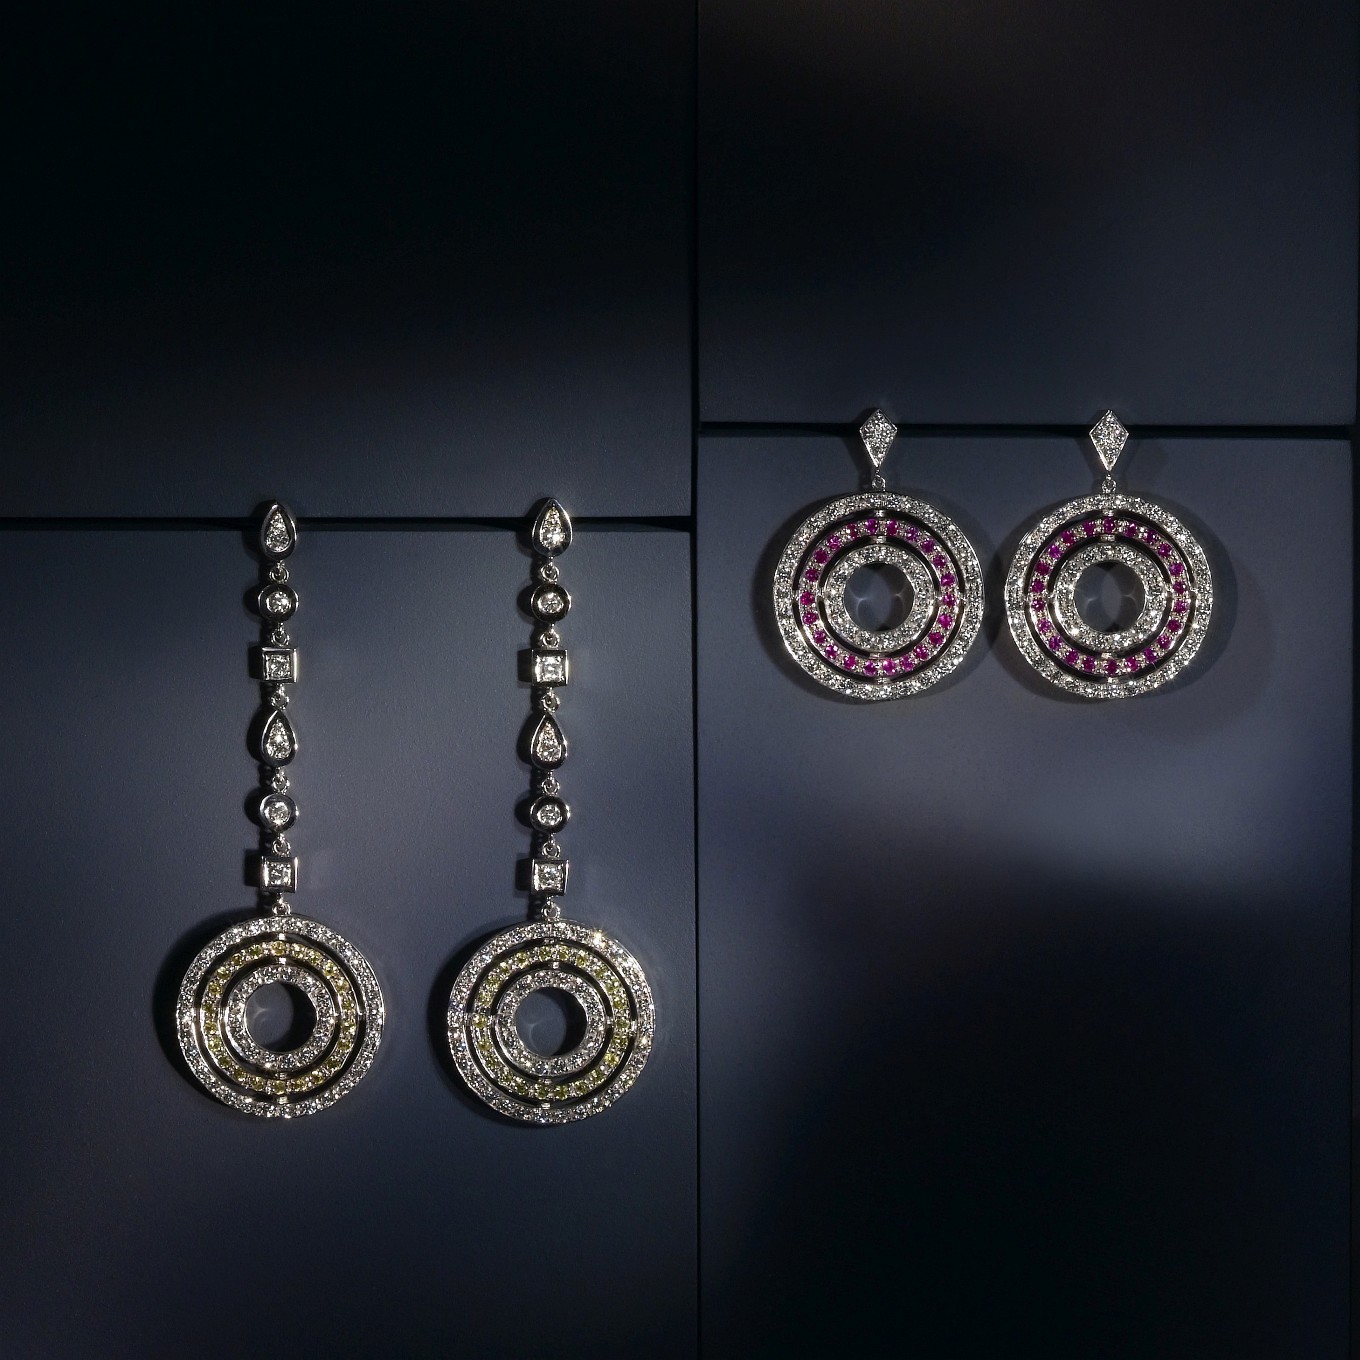 CIRCLE DROP EARRINGS WITH YELLOW SAPPHIRES & DIAMONDS. CIRCLE DROP EARRINGS WITH PINK SAPPHIRES & DIAMONDS